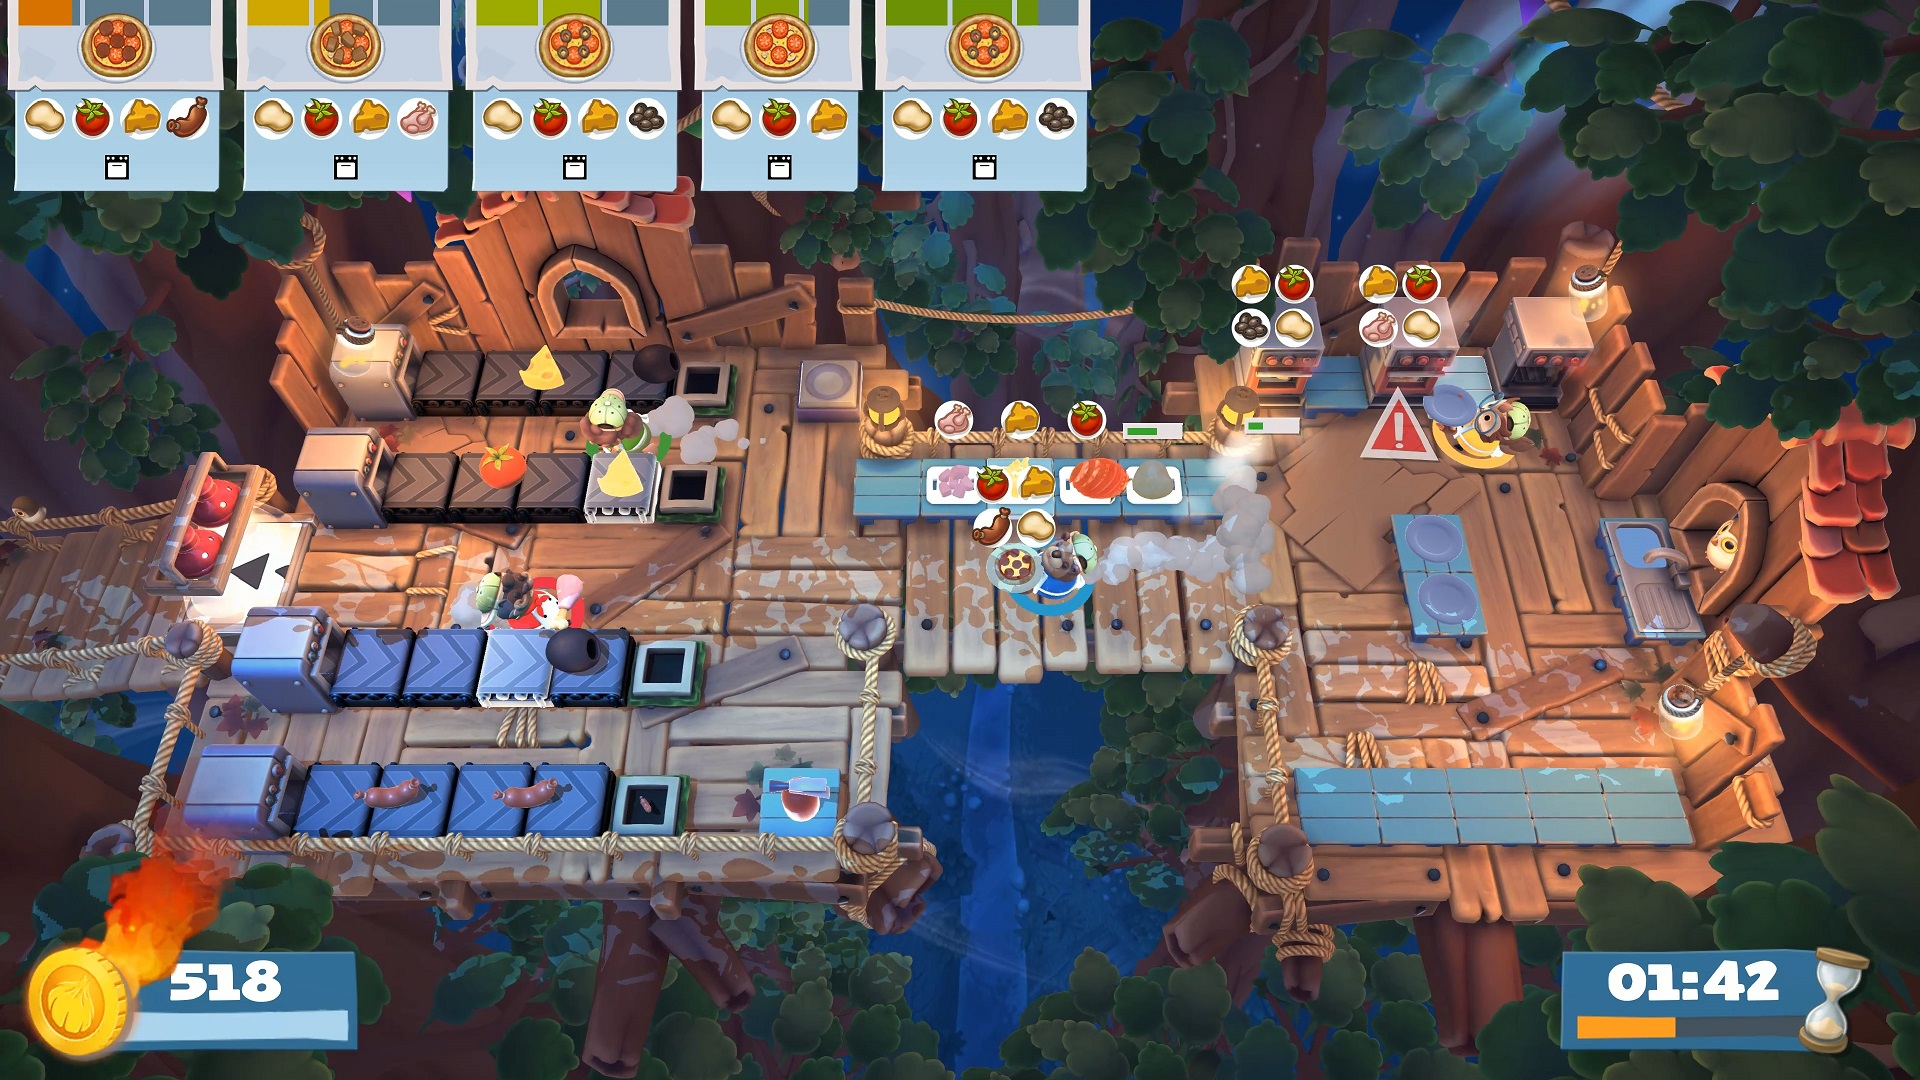 Save 20% on Overcooked! 2 - Campfire Cook Off on Steam
